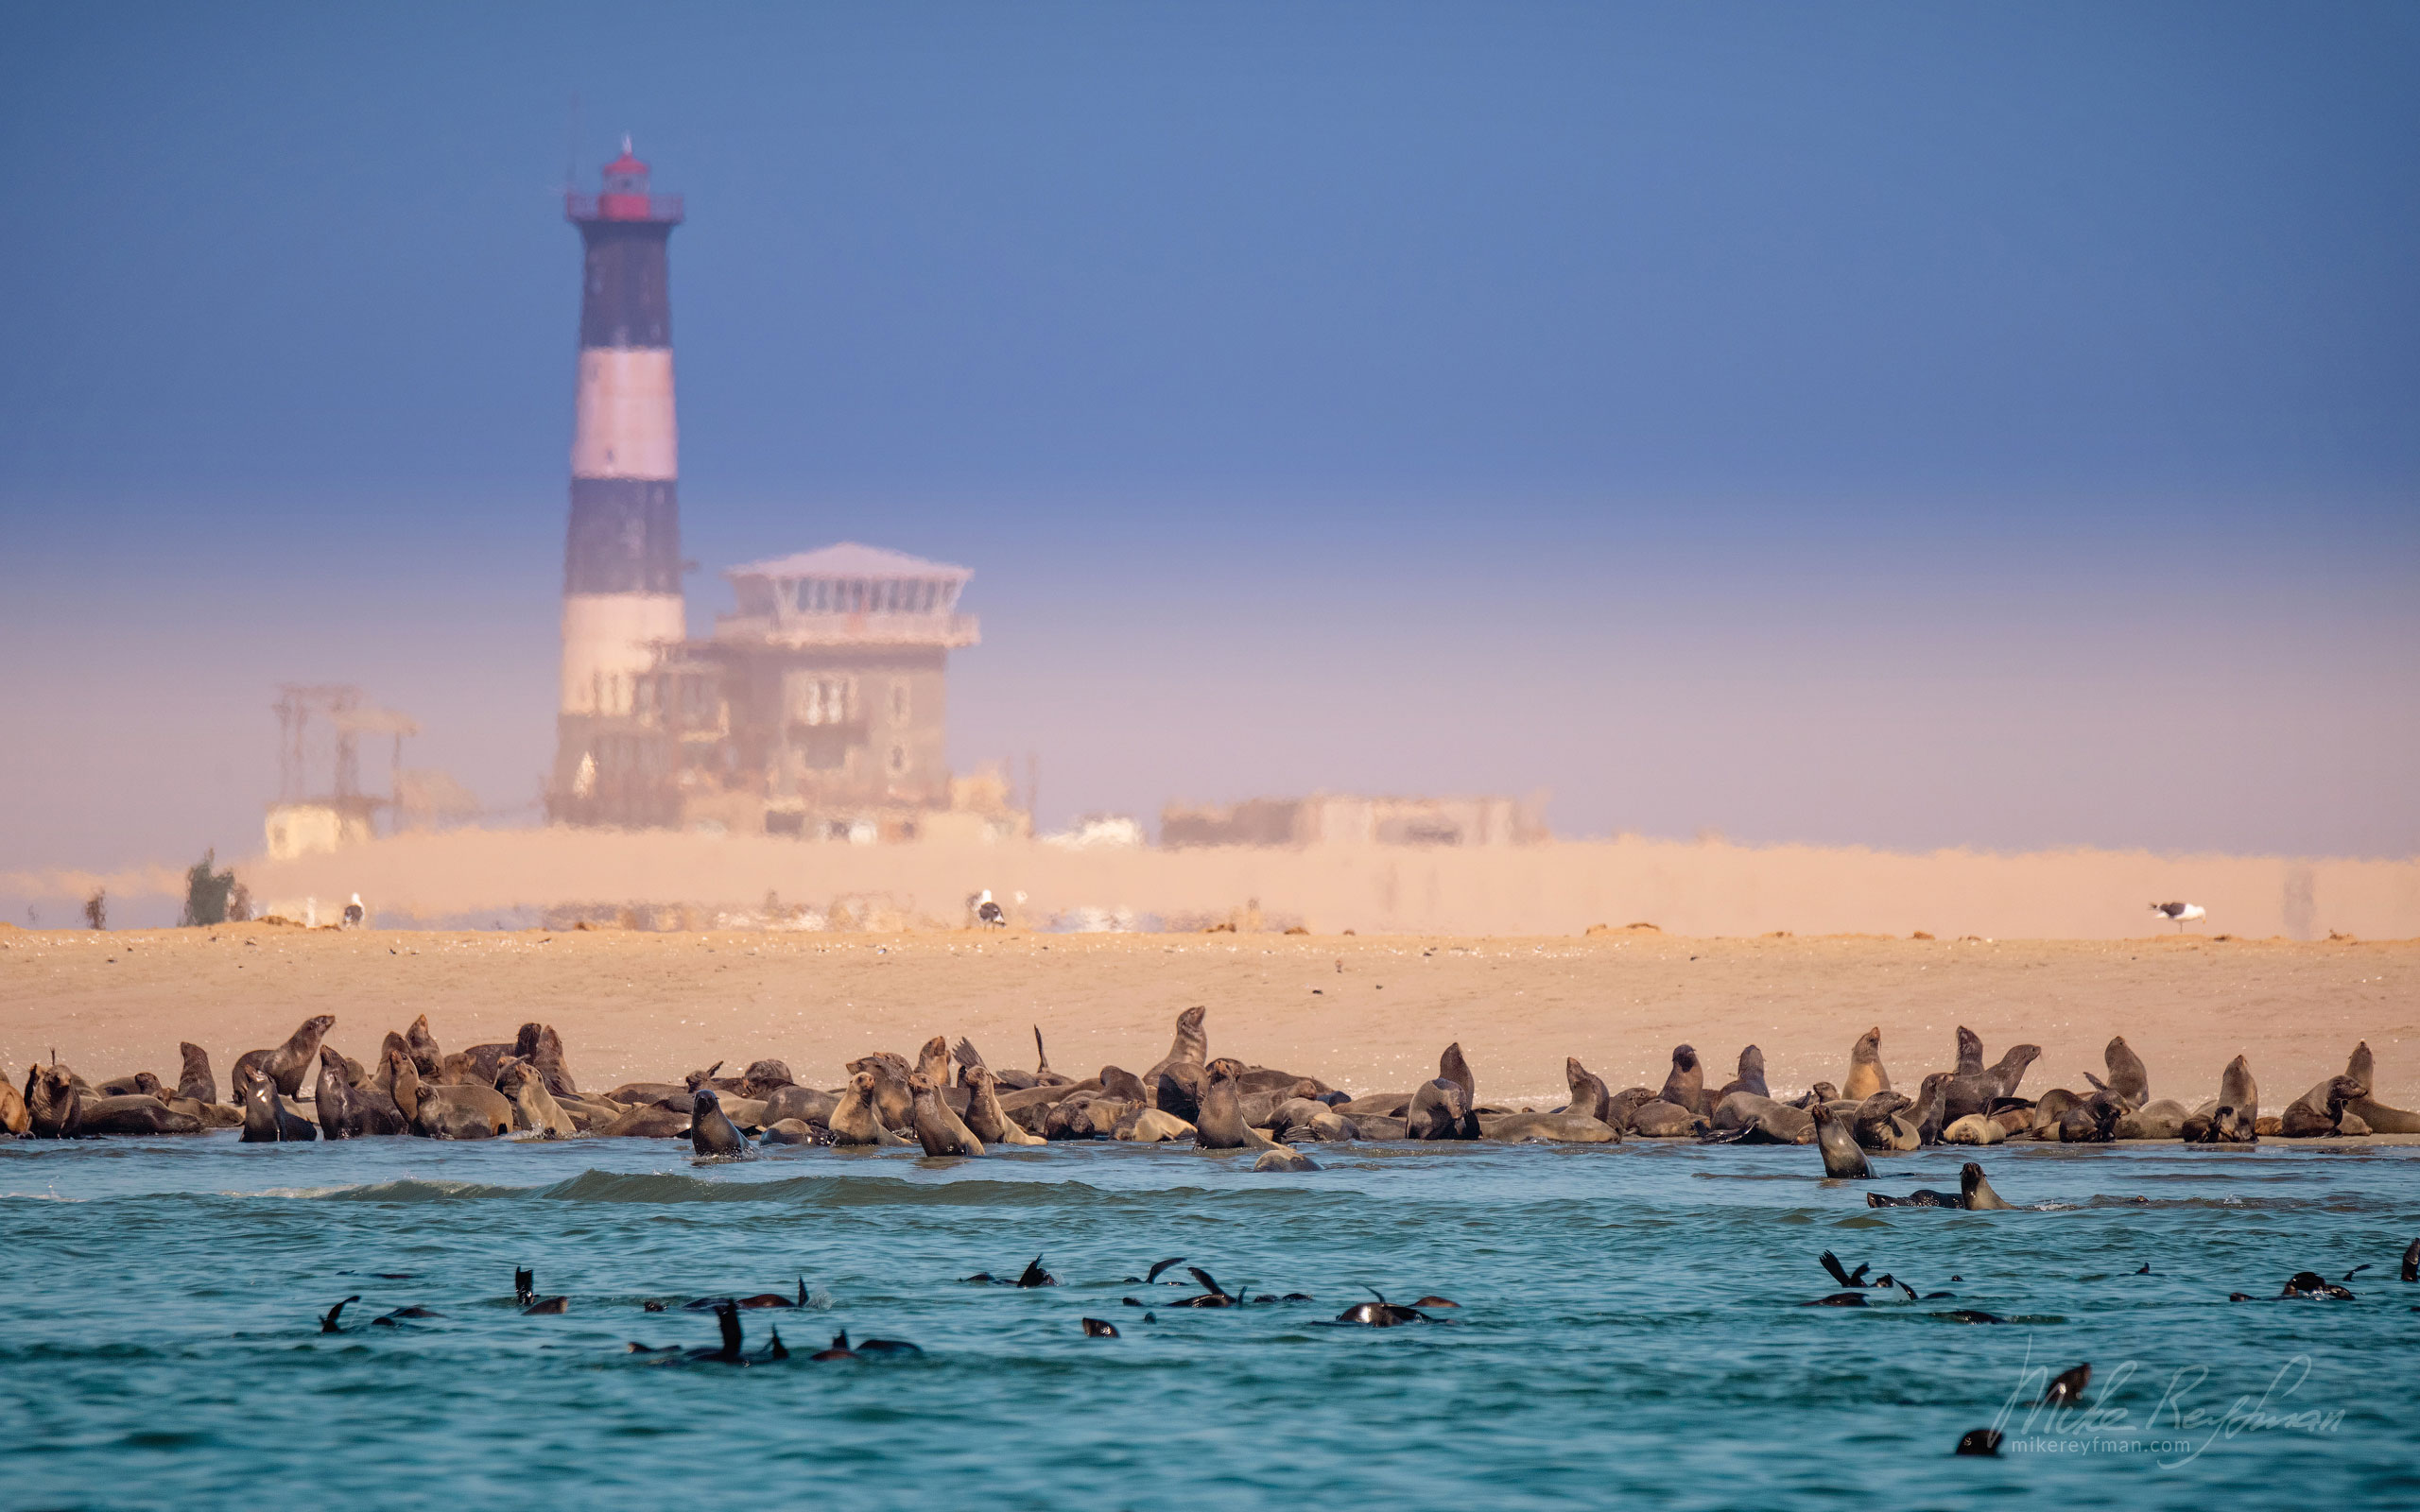 Cape Fur Seals near Pelican Point lighthouse. Walvis Bay, Namibia SCW_098_10R9549 - Shipwrecks and Endless Dunes of Namib Skeleton Coast NP, Dense ocean fogs of the Benguela Current, Cape Fur seals, and Walvis Bay Salt Works. Namibia.  - Mike Reyfman Photography